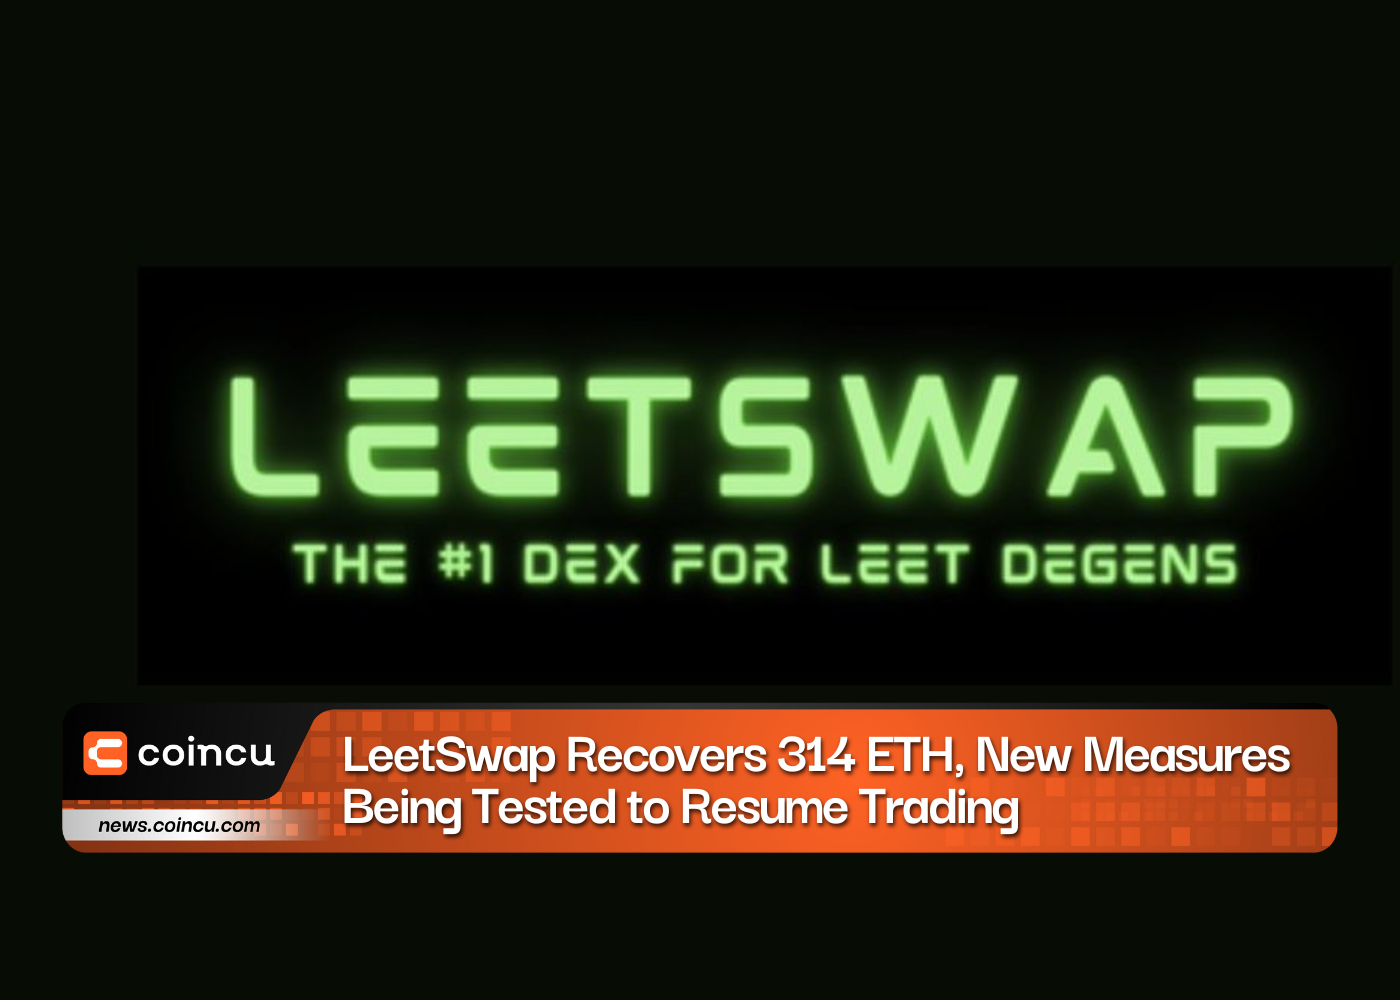 LeetSwap Recovers 314 ETH, New Measures Being Tested to Resume Trading